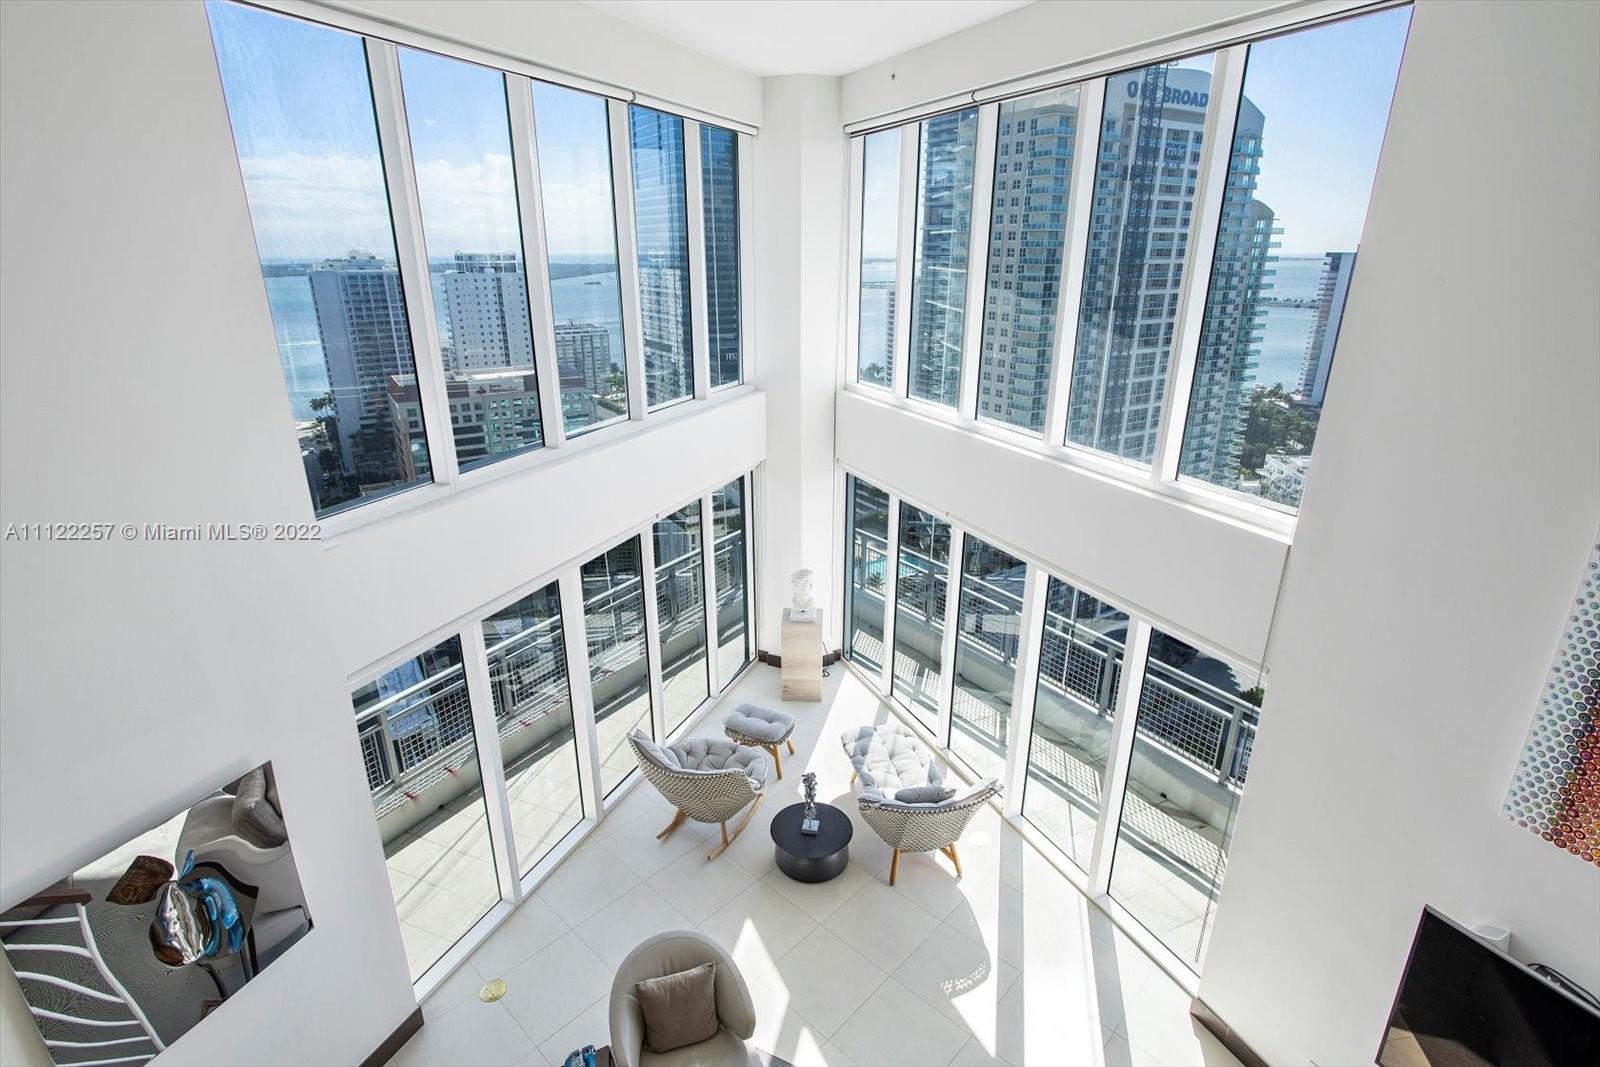 This stunning and visually dramatic two story award-winning designer residence at Infinity at Brickell is a one of a kind fully-furnished corner unit. Floating 26 floors up on the south east corner with expansive views of the bay, ocean and the city. This unit will wow you from the very entrance with the double height ceilings and floor to ceiling glass windows that make you feel like you are in the clouds. This 2,734 sq ft 3 bedroom, 3.5 bathroom features custom floating staircase, Apure Architectural Lightning, Boffi vanity, Toto toilets, custom closet cabinetry, and Italian furniture. Building amenities include: pool, jacuzzi, sauna, steam room, bike storage, 24hr security, concierge, valet parking, and a café/market in the lobby. Enjoy walking to everything Brickell has to offer.